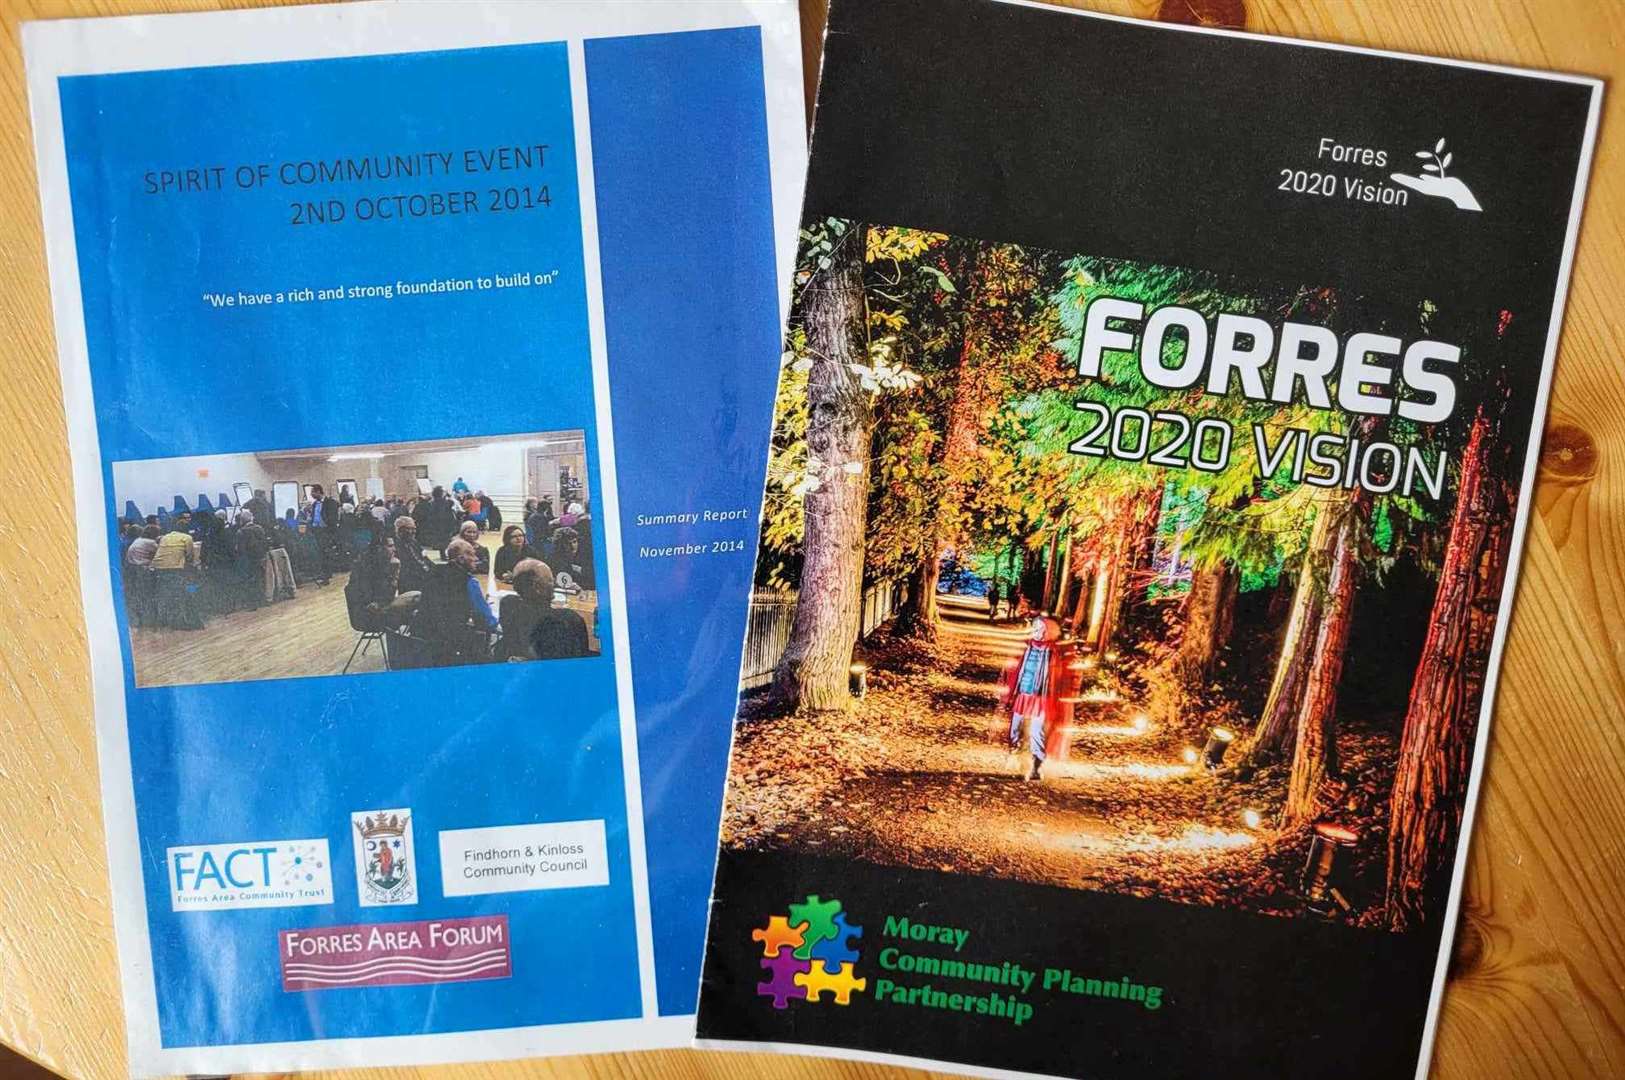 Spirit of Community 2014 helped inform the later Forres 2020 Vision.